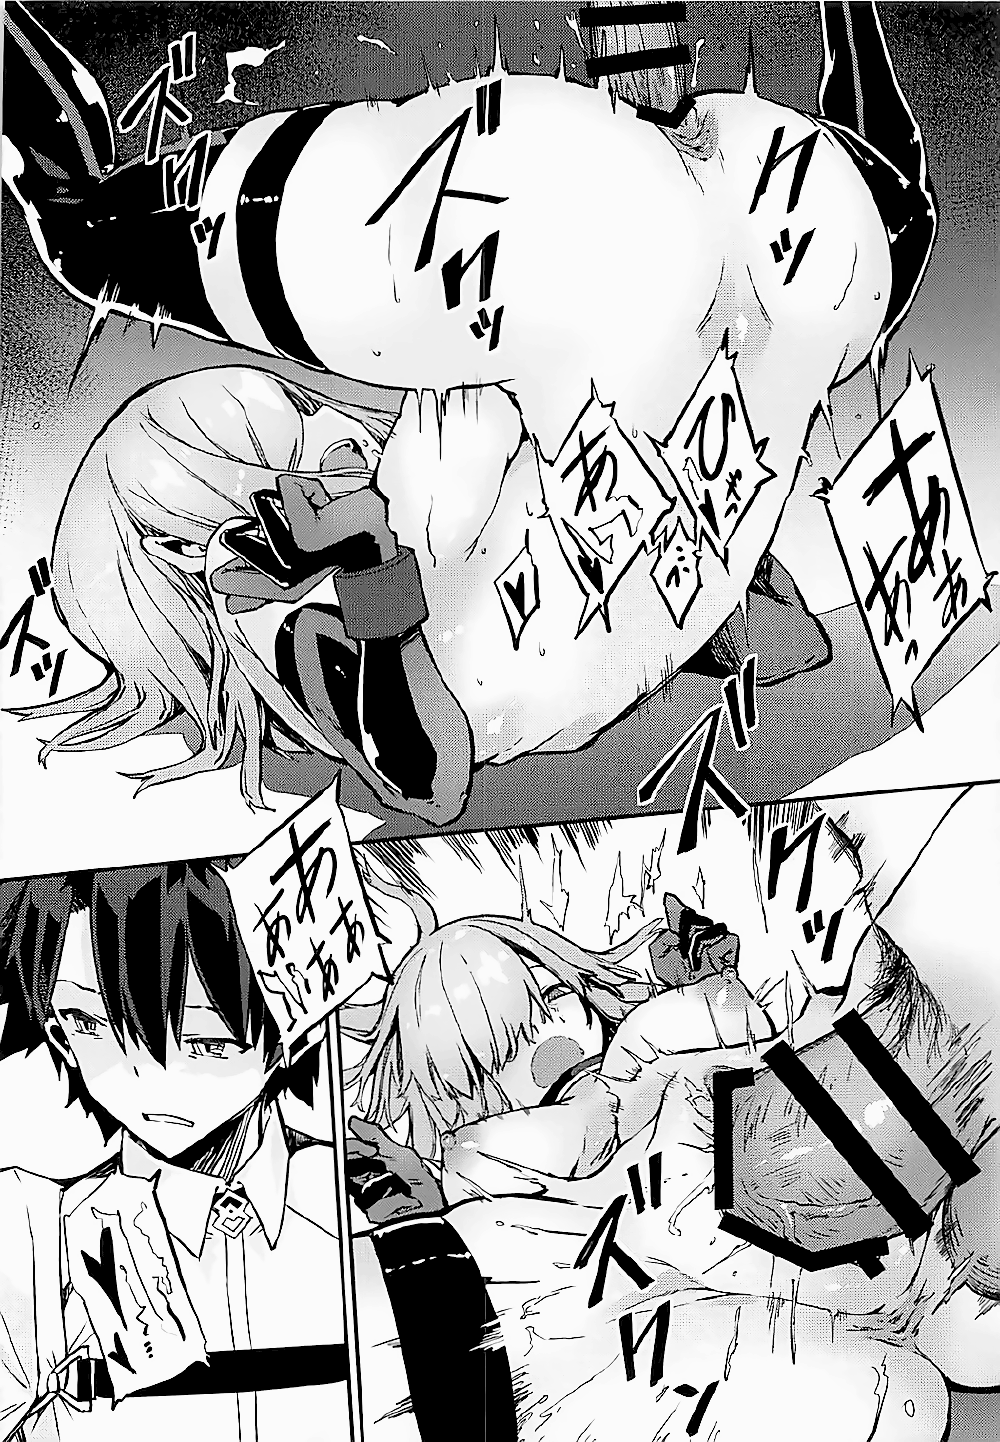 (C92) [Kenja Time (Zutta)] Bad End Catharsis Vol. 7 (Fate/Grand Order) [Vietnamese Tiếng Việt] [T.K Translation Team - Seian] (C92) [けんじゃたいむ (Zutta)] Bad End Catharsis Vol.7 (Fate/Grand Order) [ベトナム翻訳]